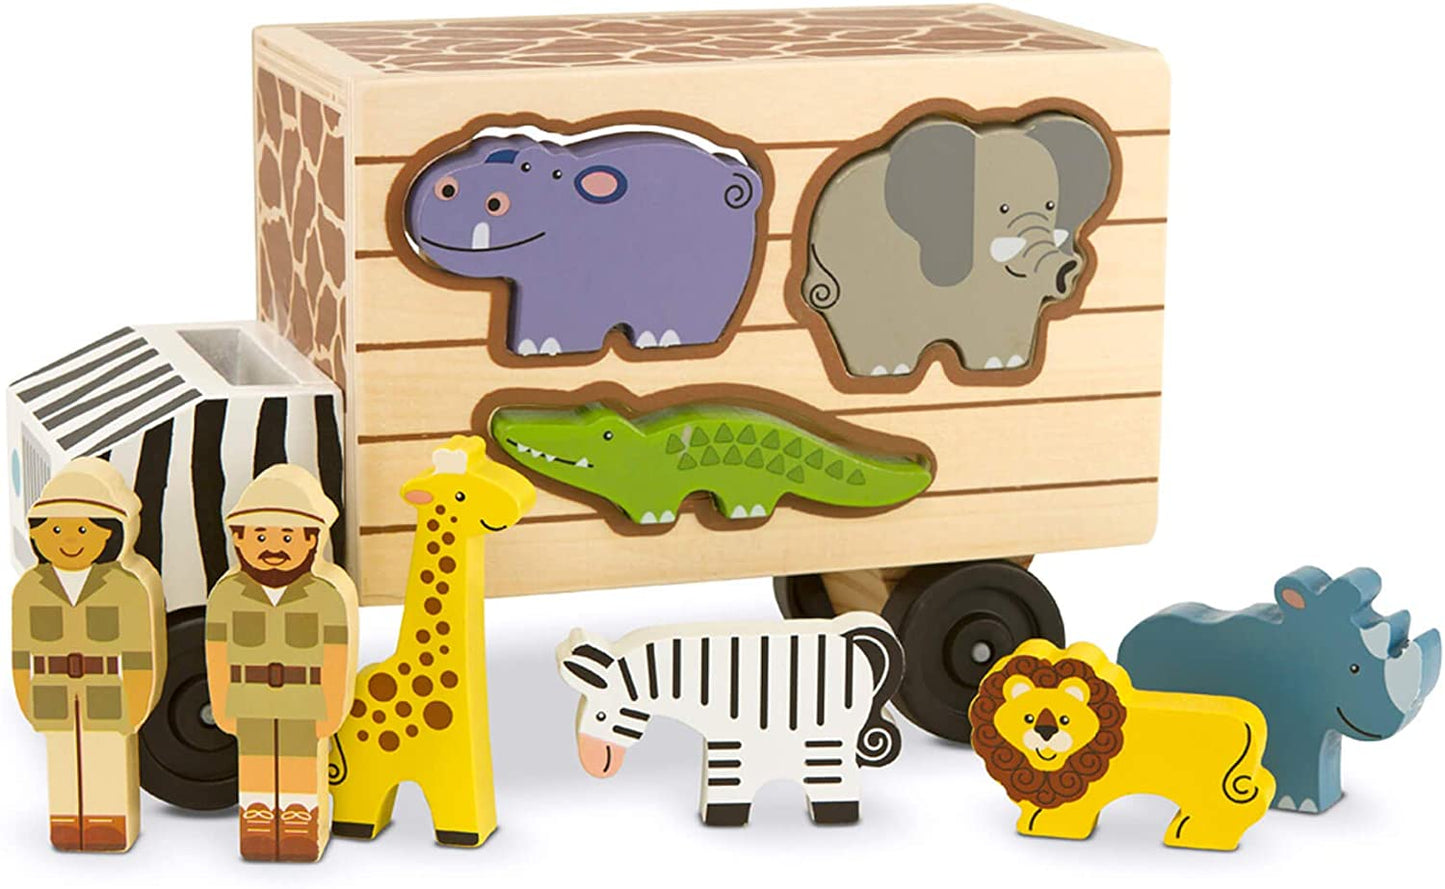 Melissa & Doug Animal Rescue Shape-Sorting Truck - Wooden Toy with 7 Animals and 2 Play Figures